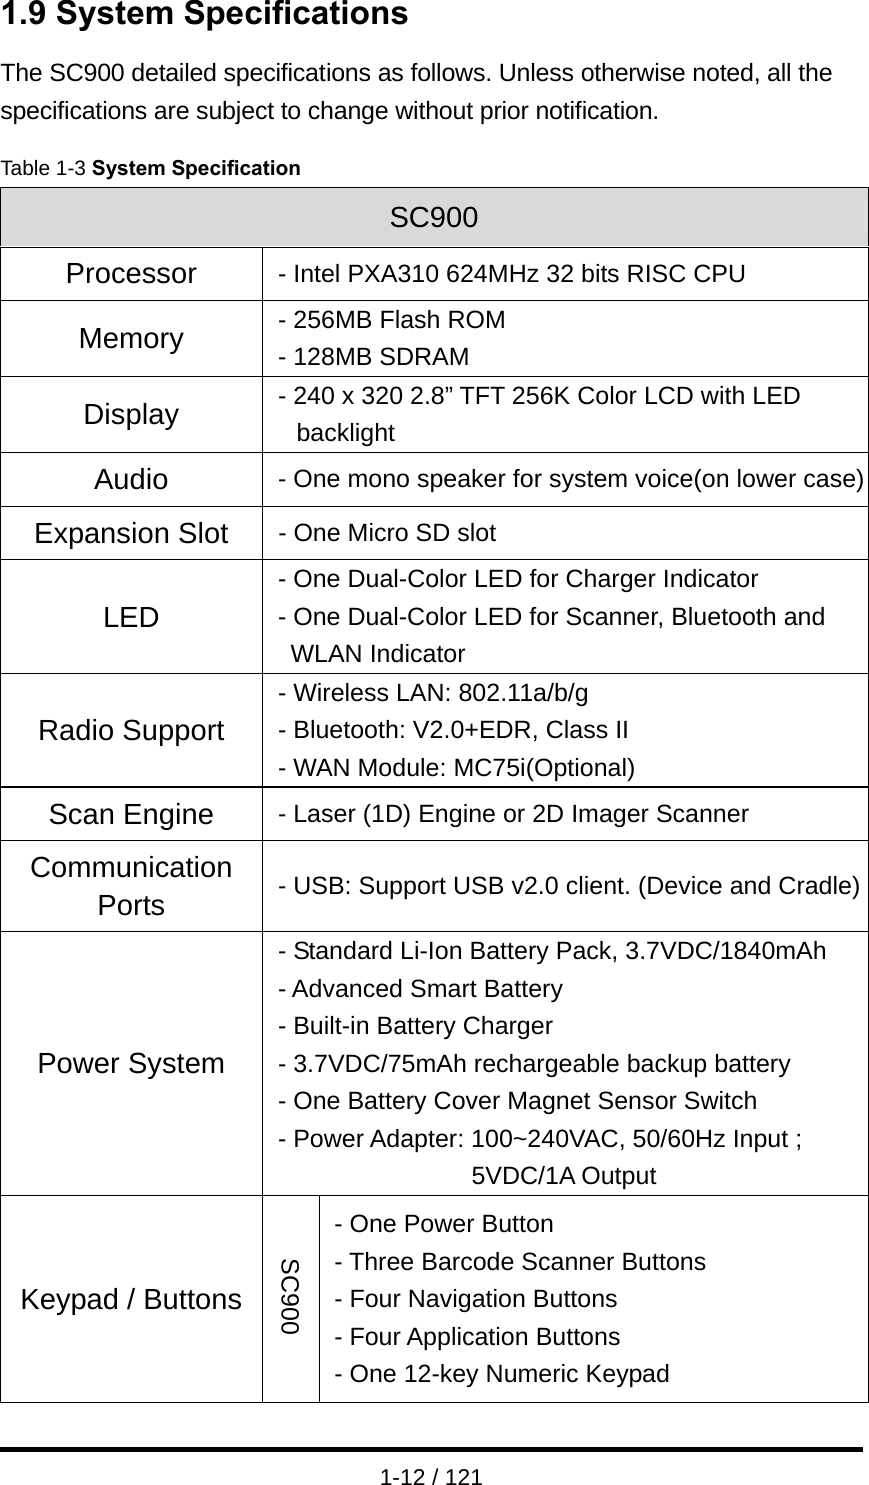  1-12 / 121 1.9 System Specifications The SC900 detailed specifications as follows. Unless otherwise noted, all the specifications are subject to change without prior notification.  Table 1-3 System Specification SC900 Processor  - Intel PXA310 624MHz 32 bits RISC CPU Memory  - 256MB Flash ROM - 128MB SDRAM Display  - 240 x 320 2.8” TFT 256K Color LCD with LED backlight Audio  - One mono speaker for system voice(on lower case)Expansion Slot  - One Micro SD slot LED - One Dual-Color LED for Charger Indicator - One Dual-Color LED for Scanner, Bluetooth and WLAN Indicator Radio Support - Wireless LAN: 802.11a/b/g - Bluetooth: V2.0+EDR, Class II - WAN Module: MC75i(Optional) Scan Engine  - Laser (1D) Engine or 2D Imager Scanner Communication Ports  - USB: Support USB v2.0 client. (Device and Cradle)Power System - Standard Li-Ion Battery Pack, 3.7VDC/1840mAh - Advanced Smart Battery - Built-in Battery Charger - 3.7VDC/75mAh rechargeable backup battery - One Battery Cover Magnet Sensor Switch - Power Adapter: 100~240VAC, 50/60Hz Input ; 5VDC/1A Output Keypad / Buttons SC900 - One Power Button - Three Barcode Scanner Buttons - Four Navigation Buttons - Four Application Buttons - One 12-key Numeric Keypad 